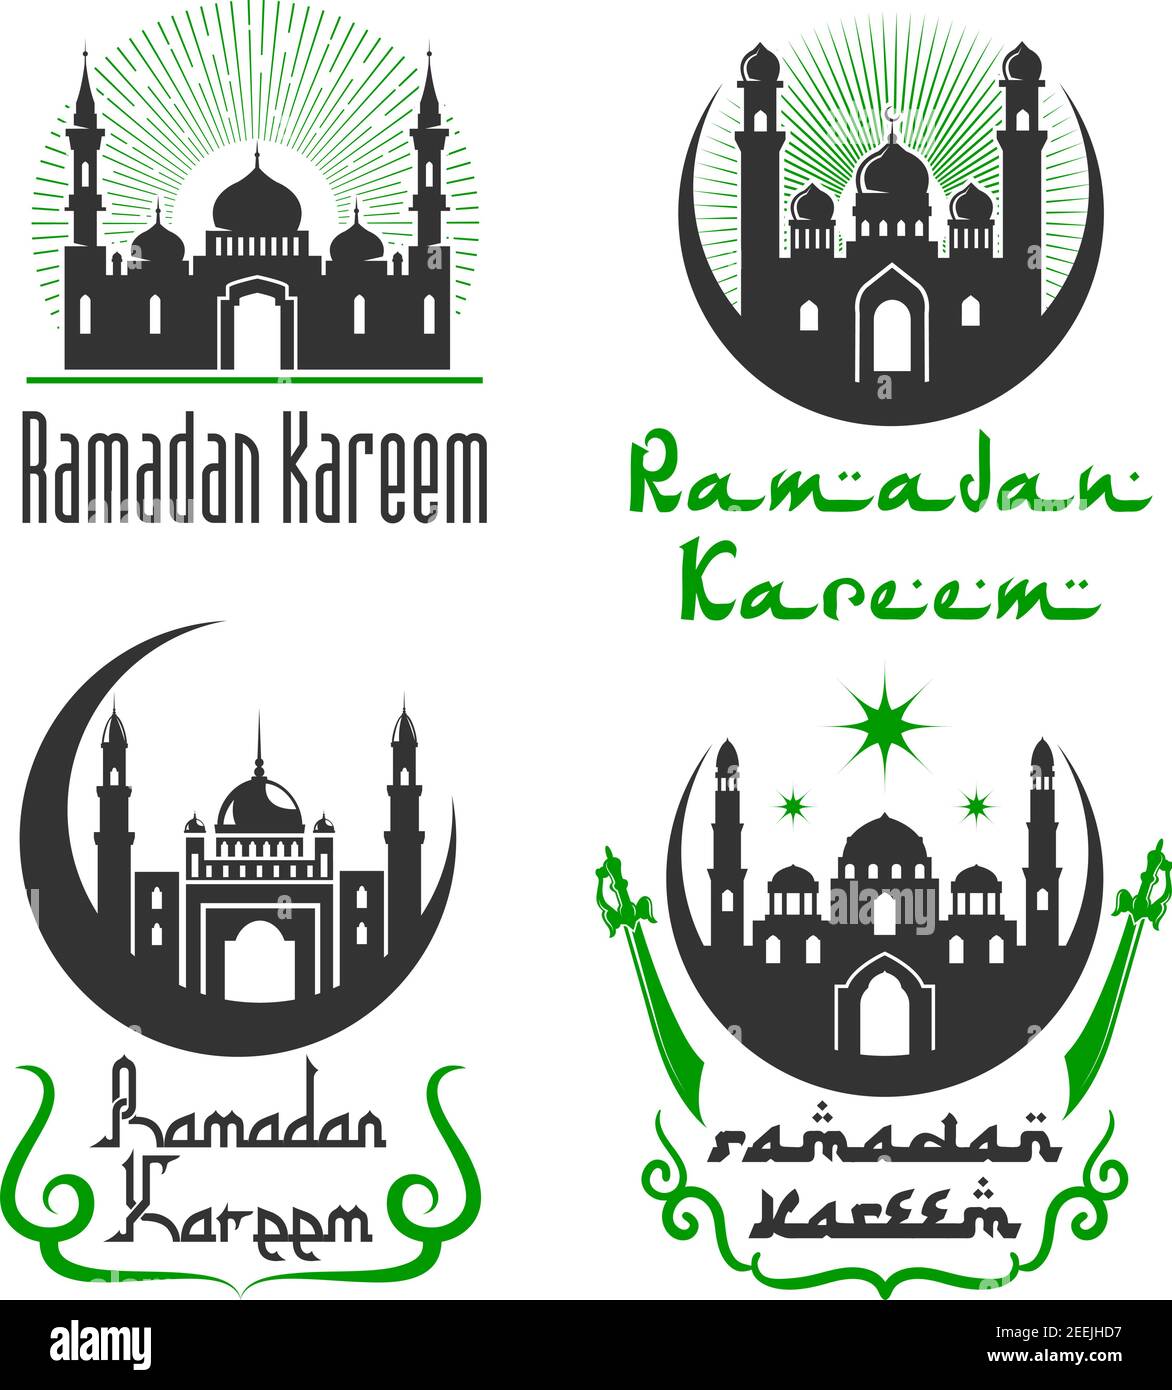 Ramadan Kareem greetings of mosque, crescent moon and shining star in sky, lanterns in minarets and Arabic calligraphy for Islamic or Muslim tradition Stock Vector